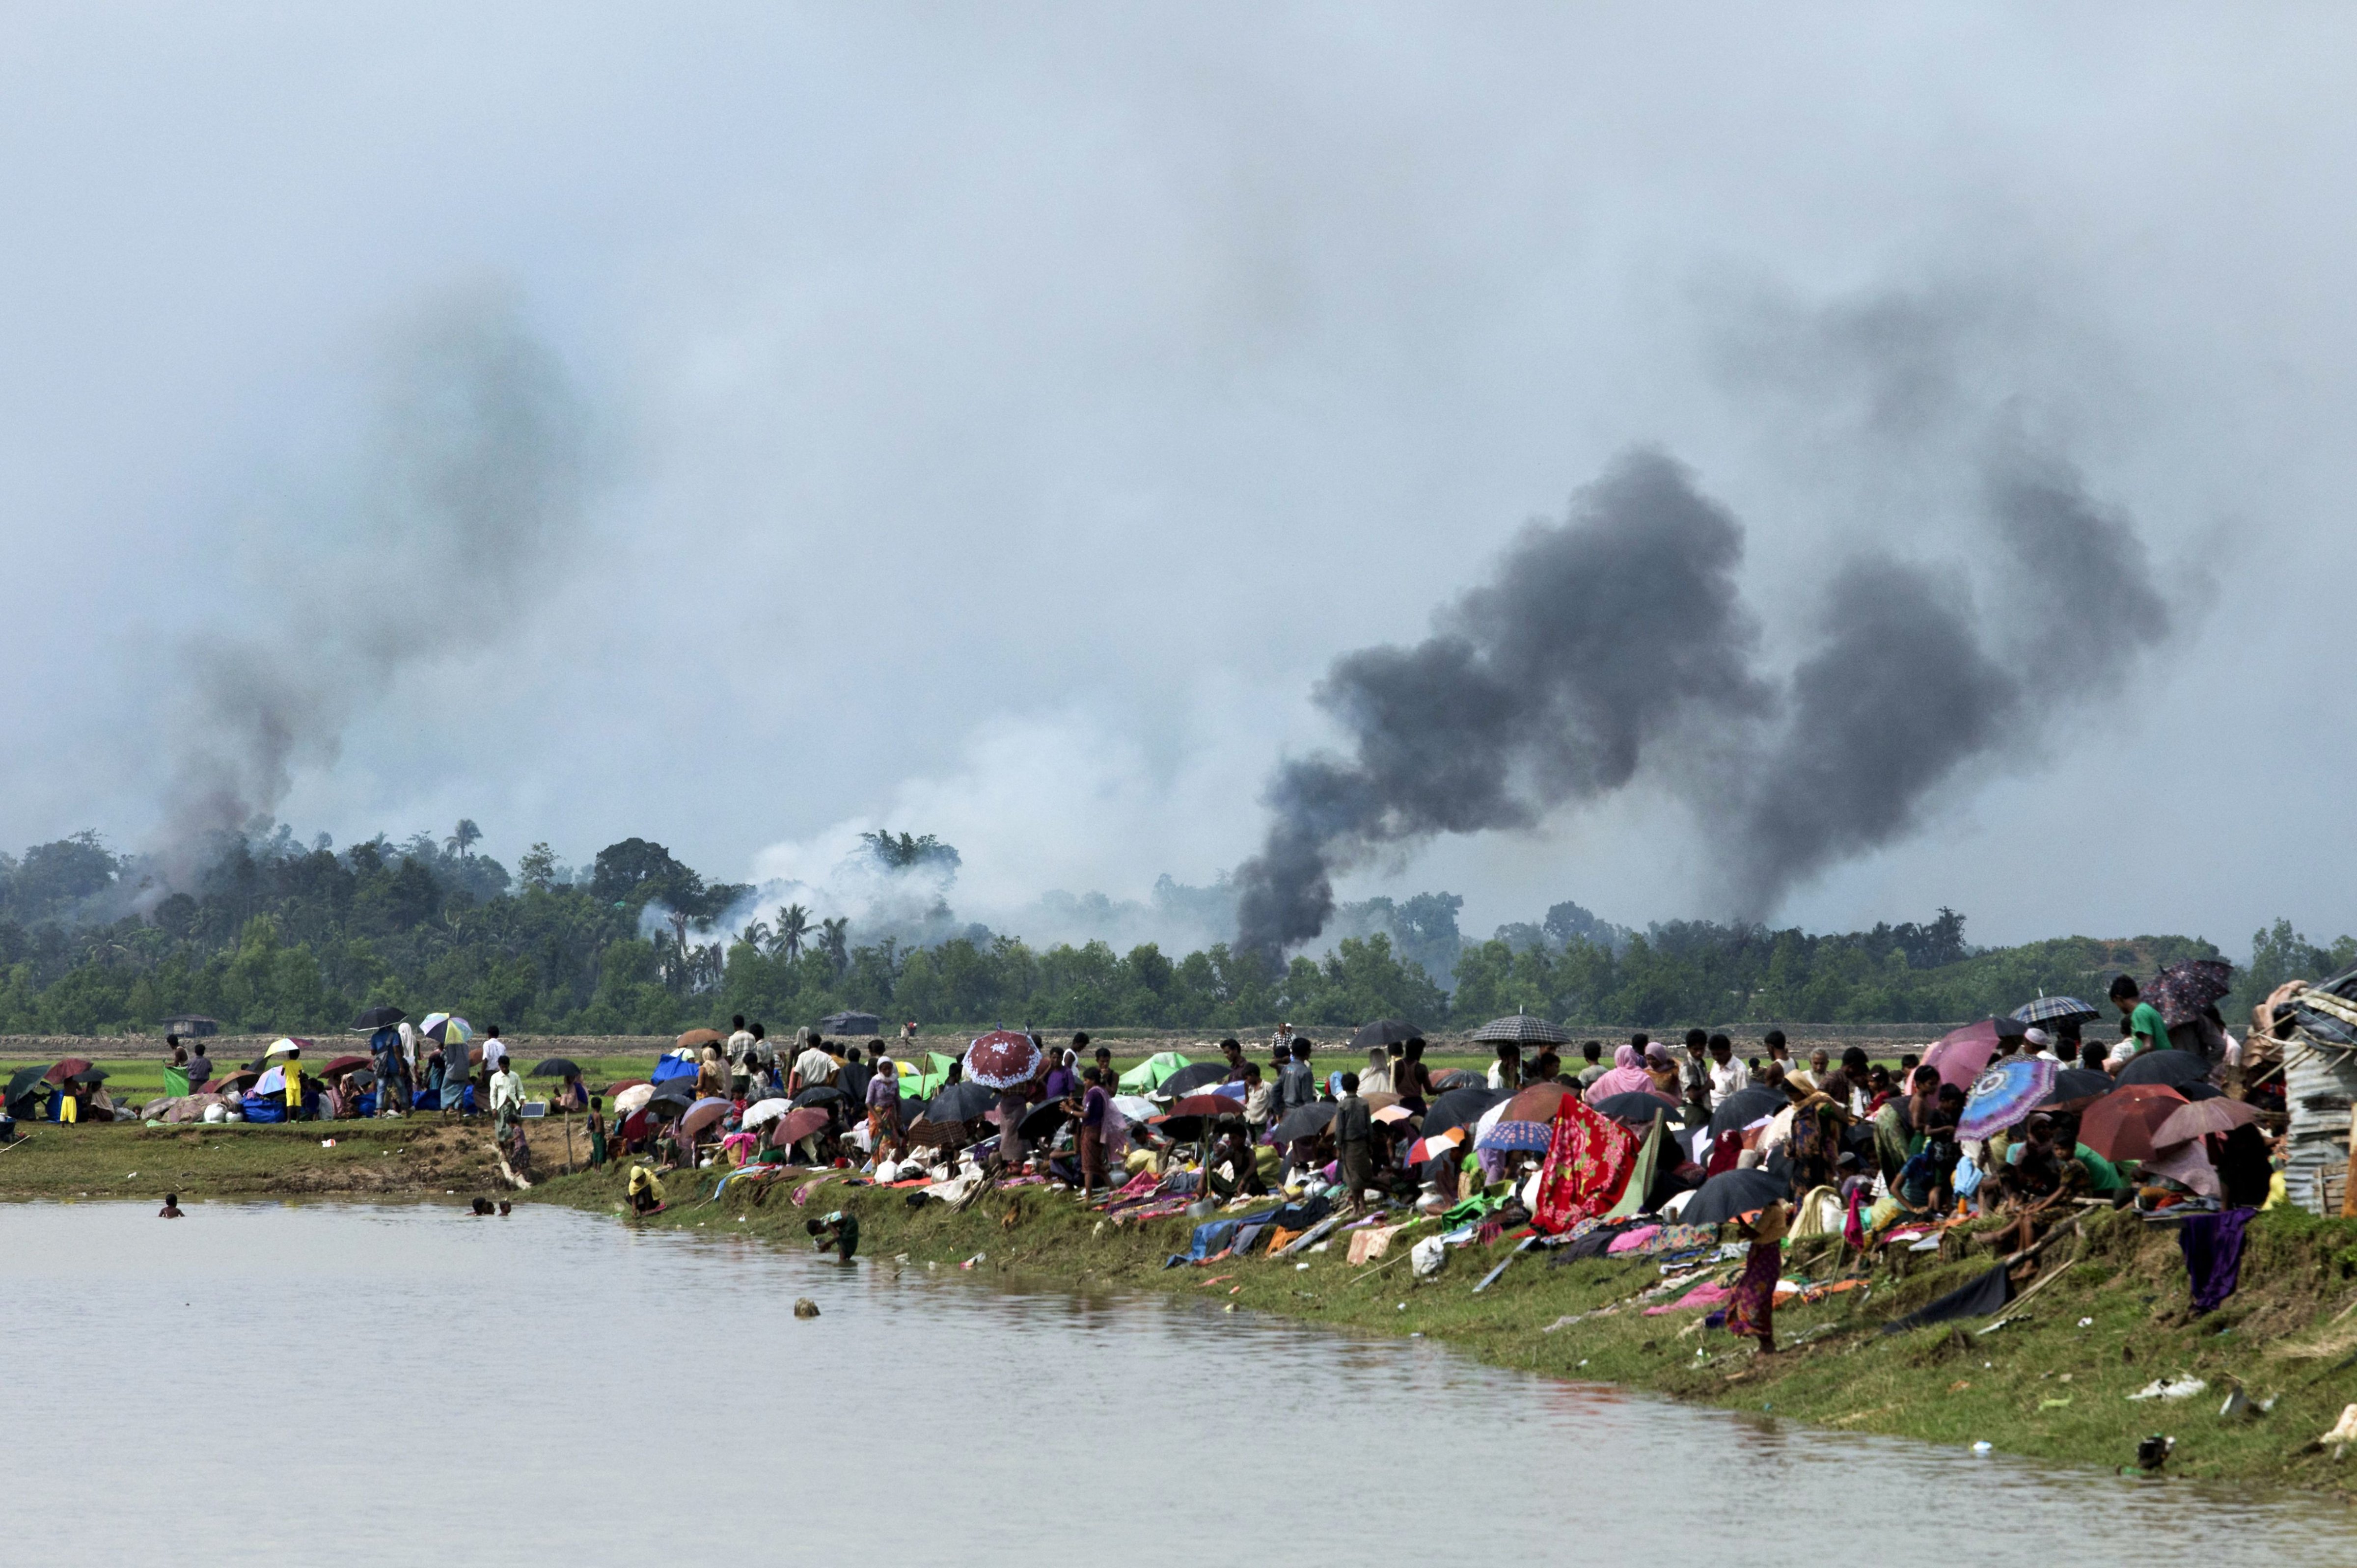 Smoke billows above what is believed to be a burning village in Myanmar's Rakhine state as members of the Rohingya Muslim minority take shelter in Ukhia, Bangladesh on Sept. 4, 2017. (K.M. Asad—AFP/Getty Images)